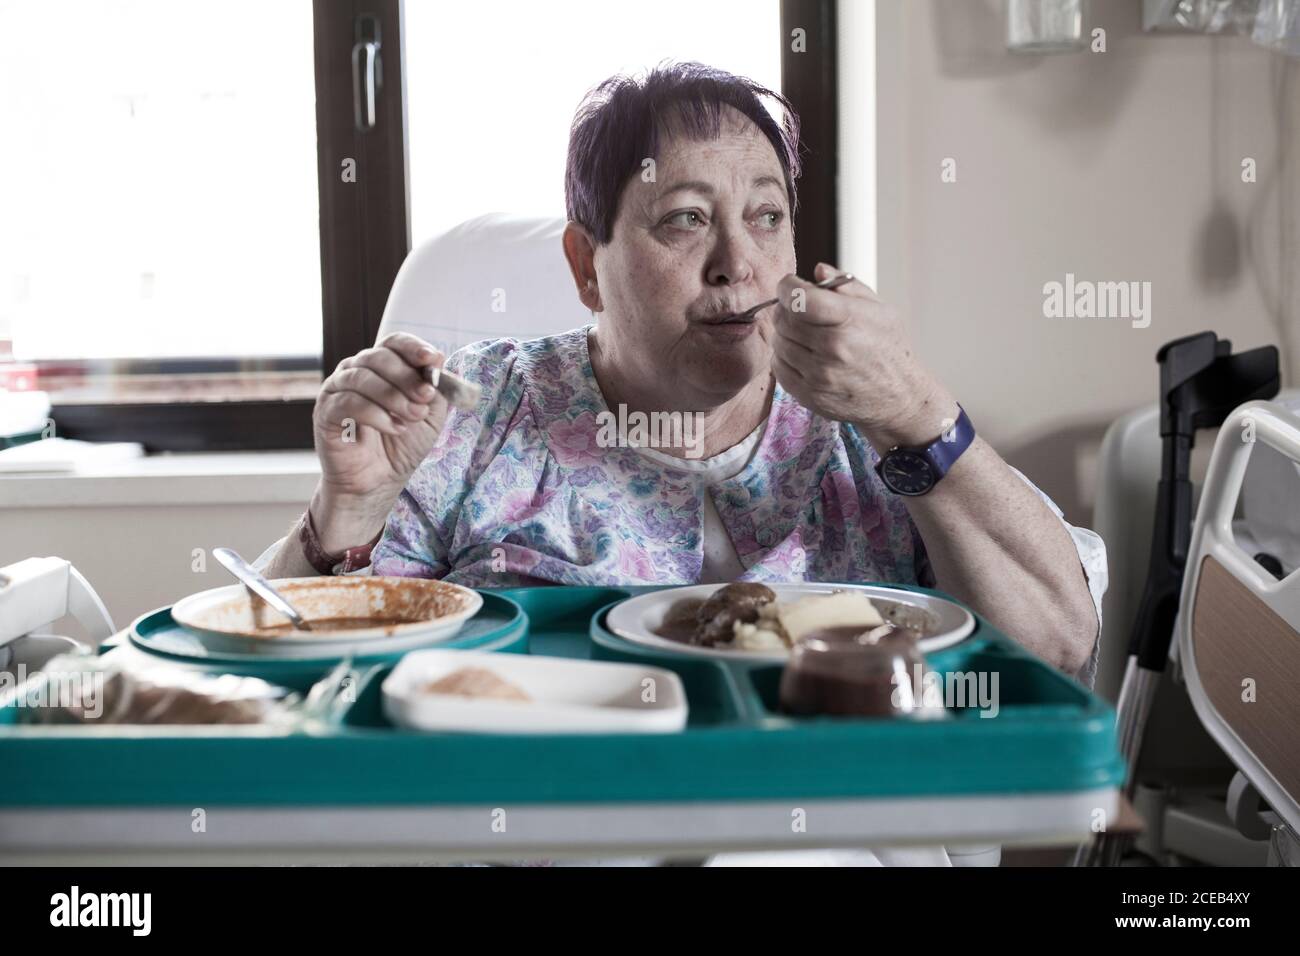 Mature woMan hospitalized for knee surgery, sitting in the chair, eating food from the tray Stock Photo